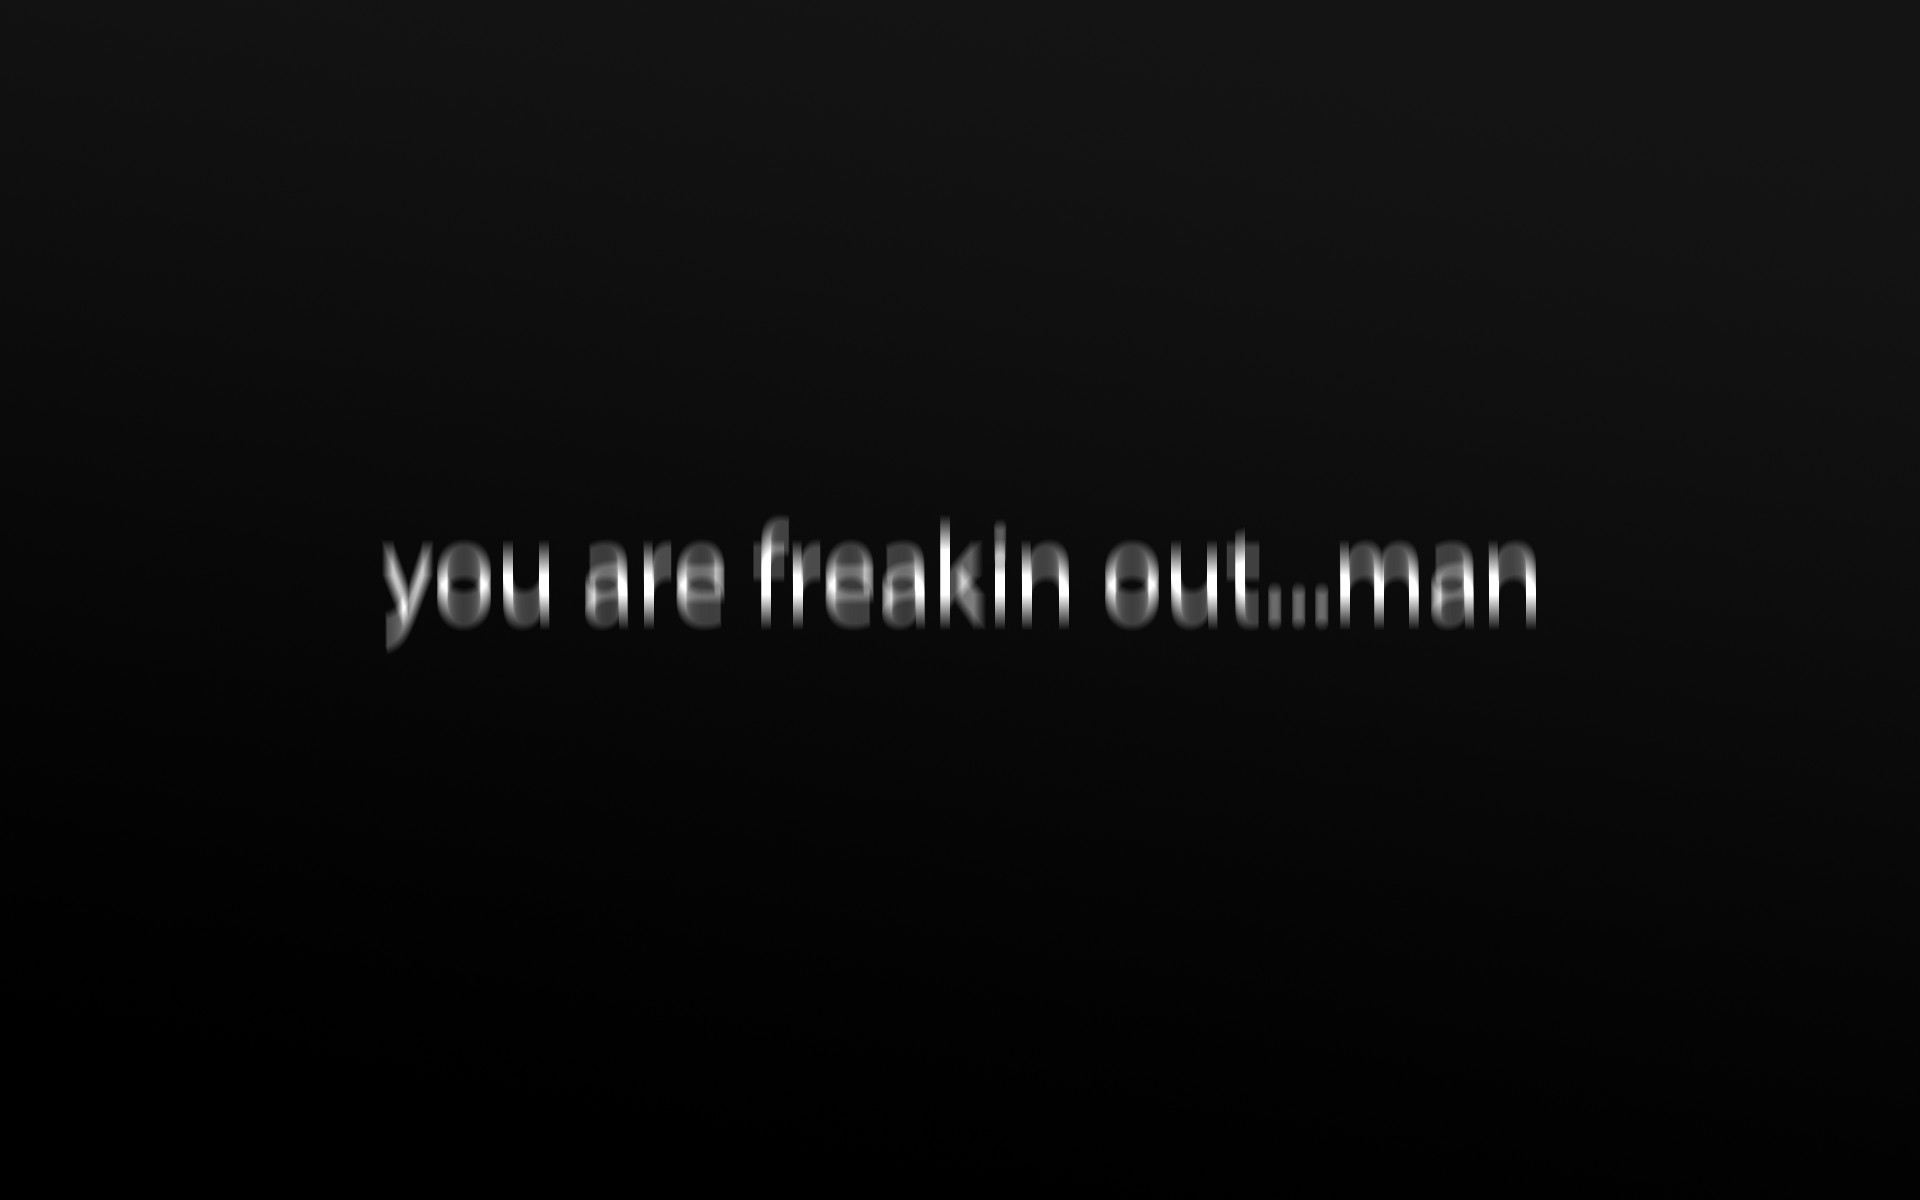 1920x1200 You are freaking out ... man wallpaper - 691264